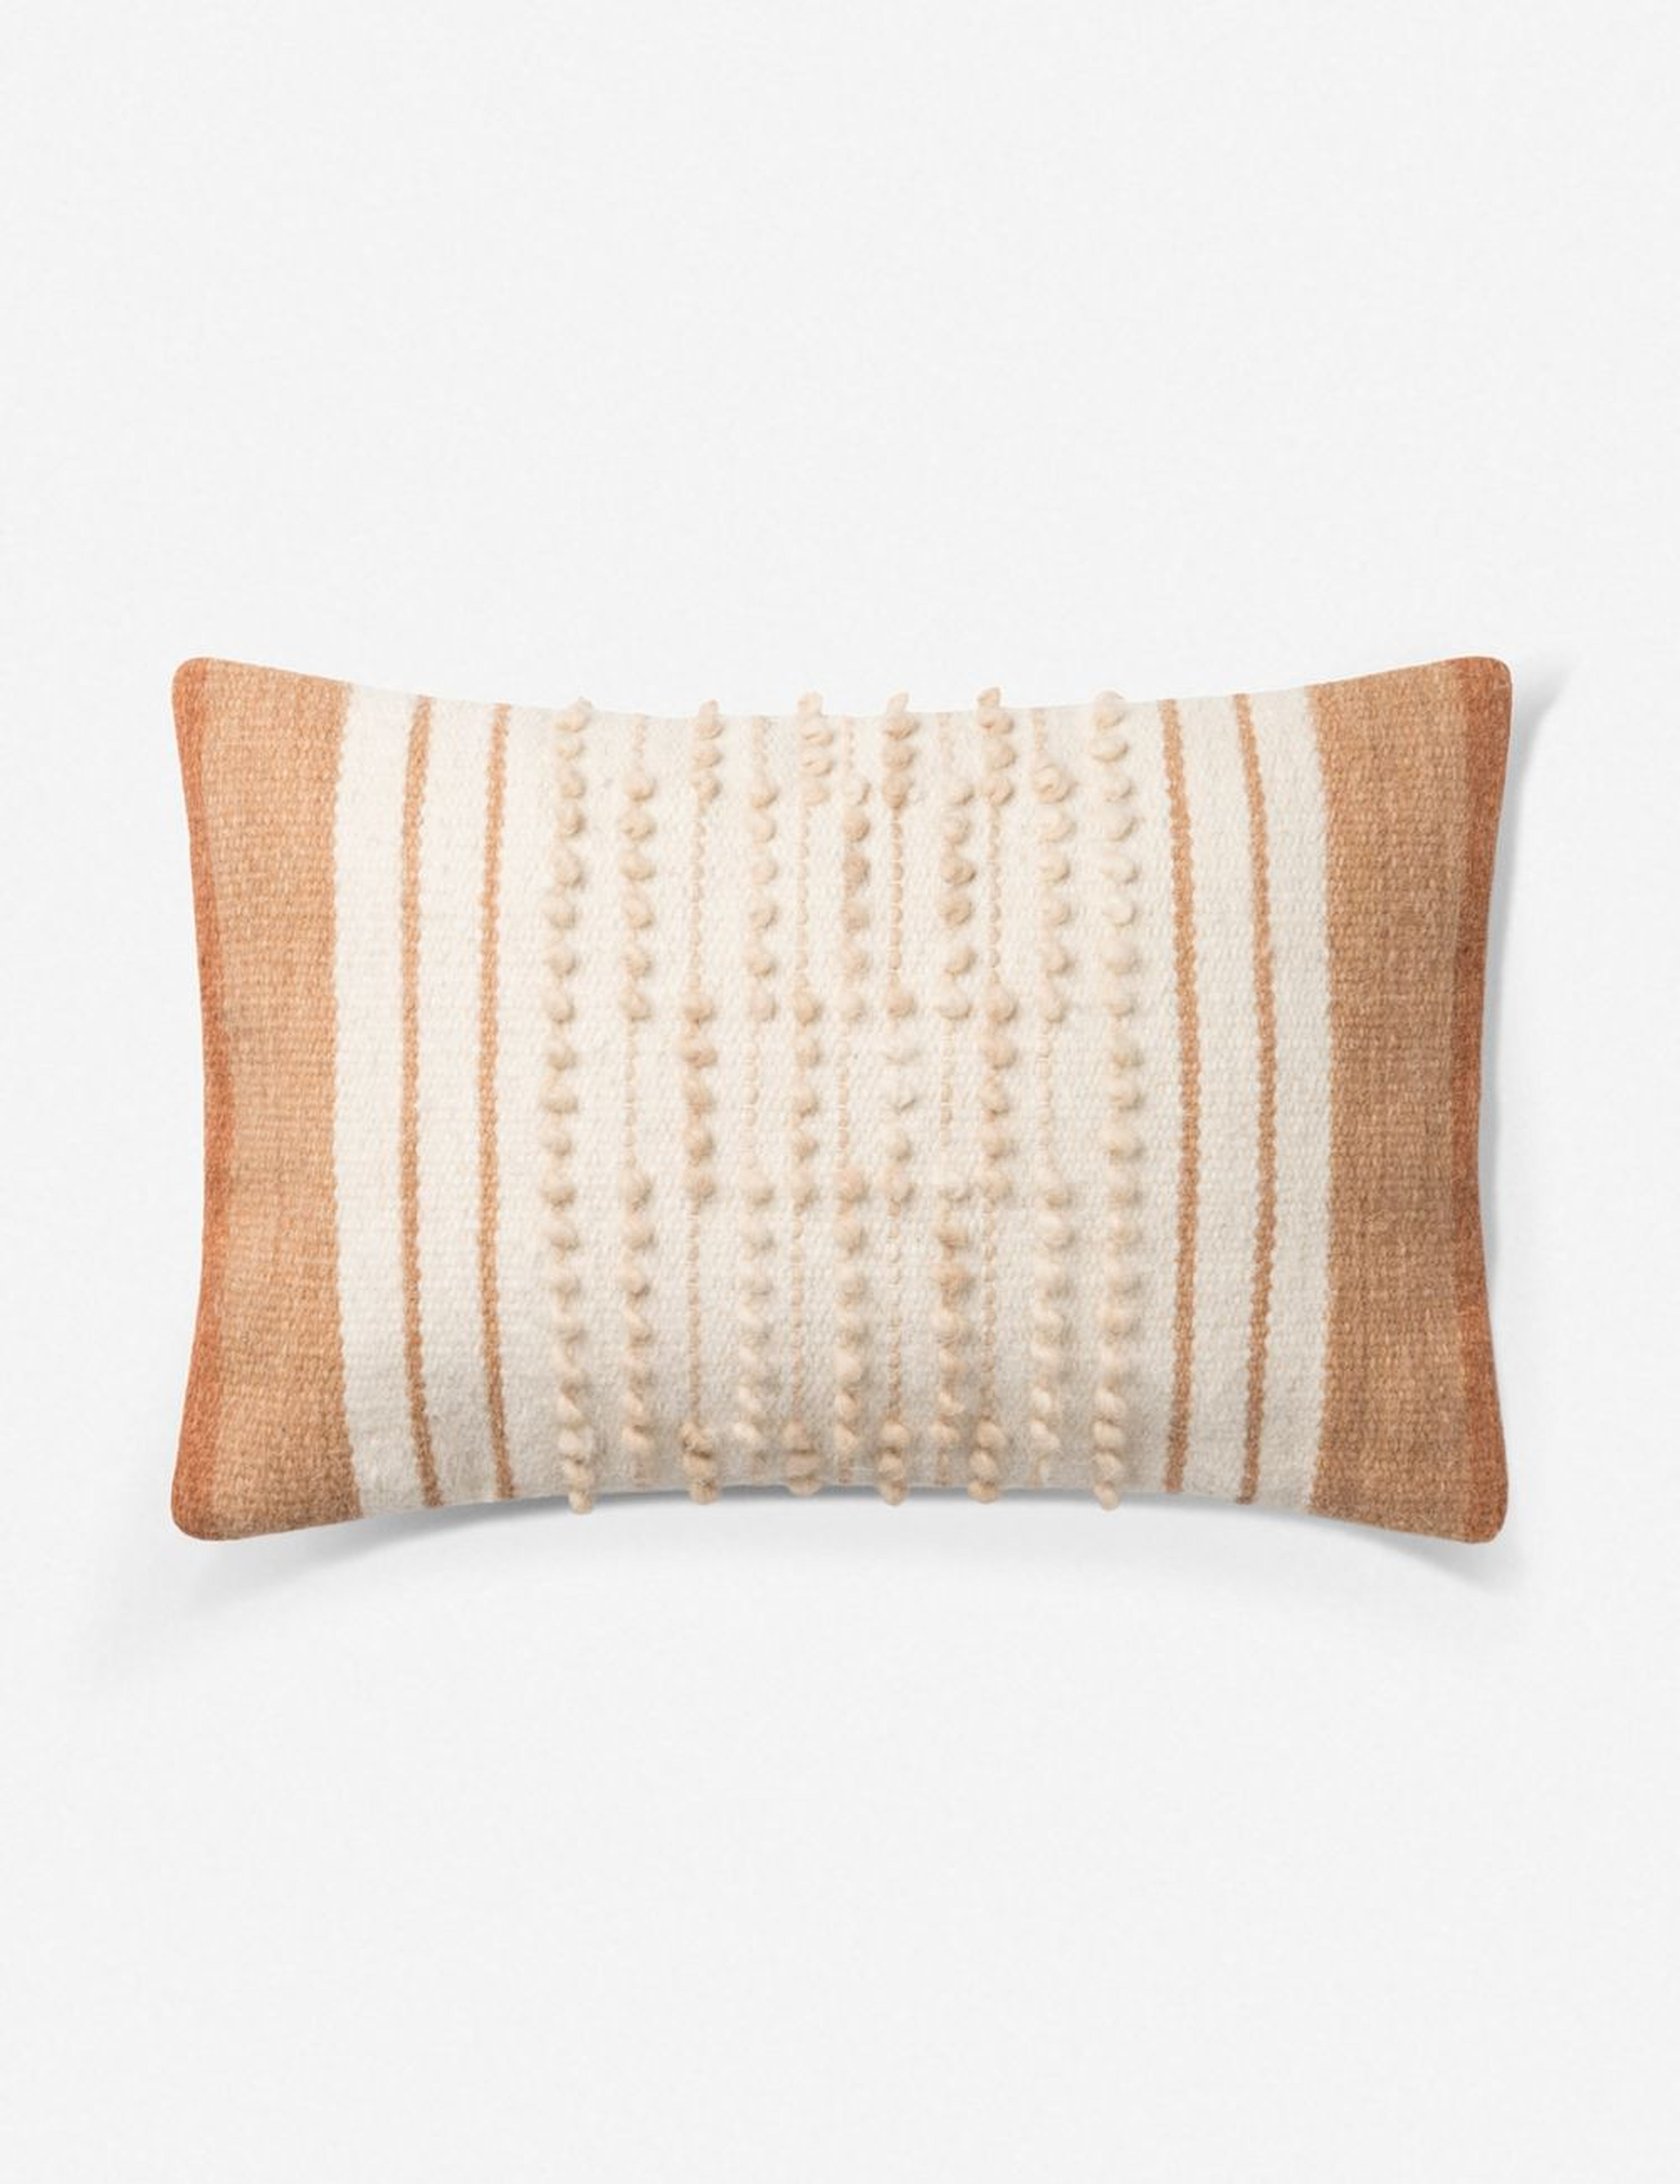 OISE LUMBAR PILLOW, RUST AND NATURAL, ED ELLEN DEGENERES CRAFTED BY LOLOI - Lulu and Georgia